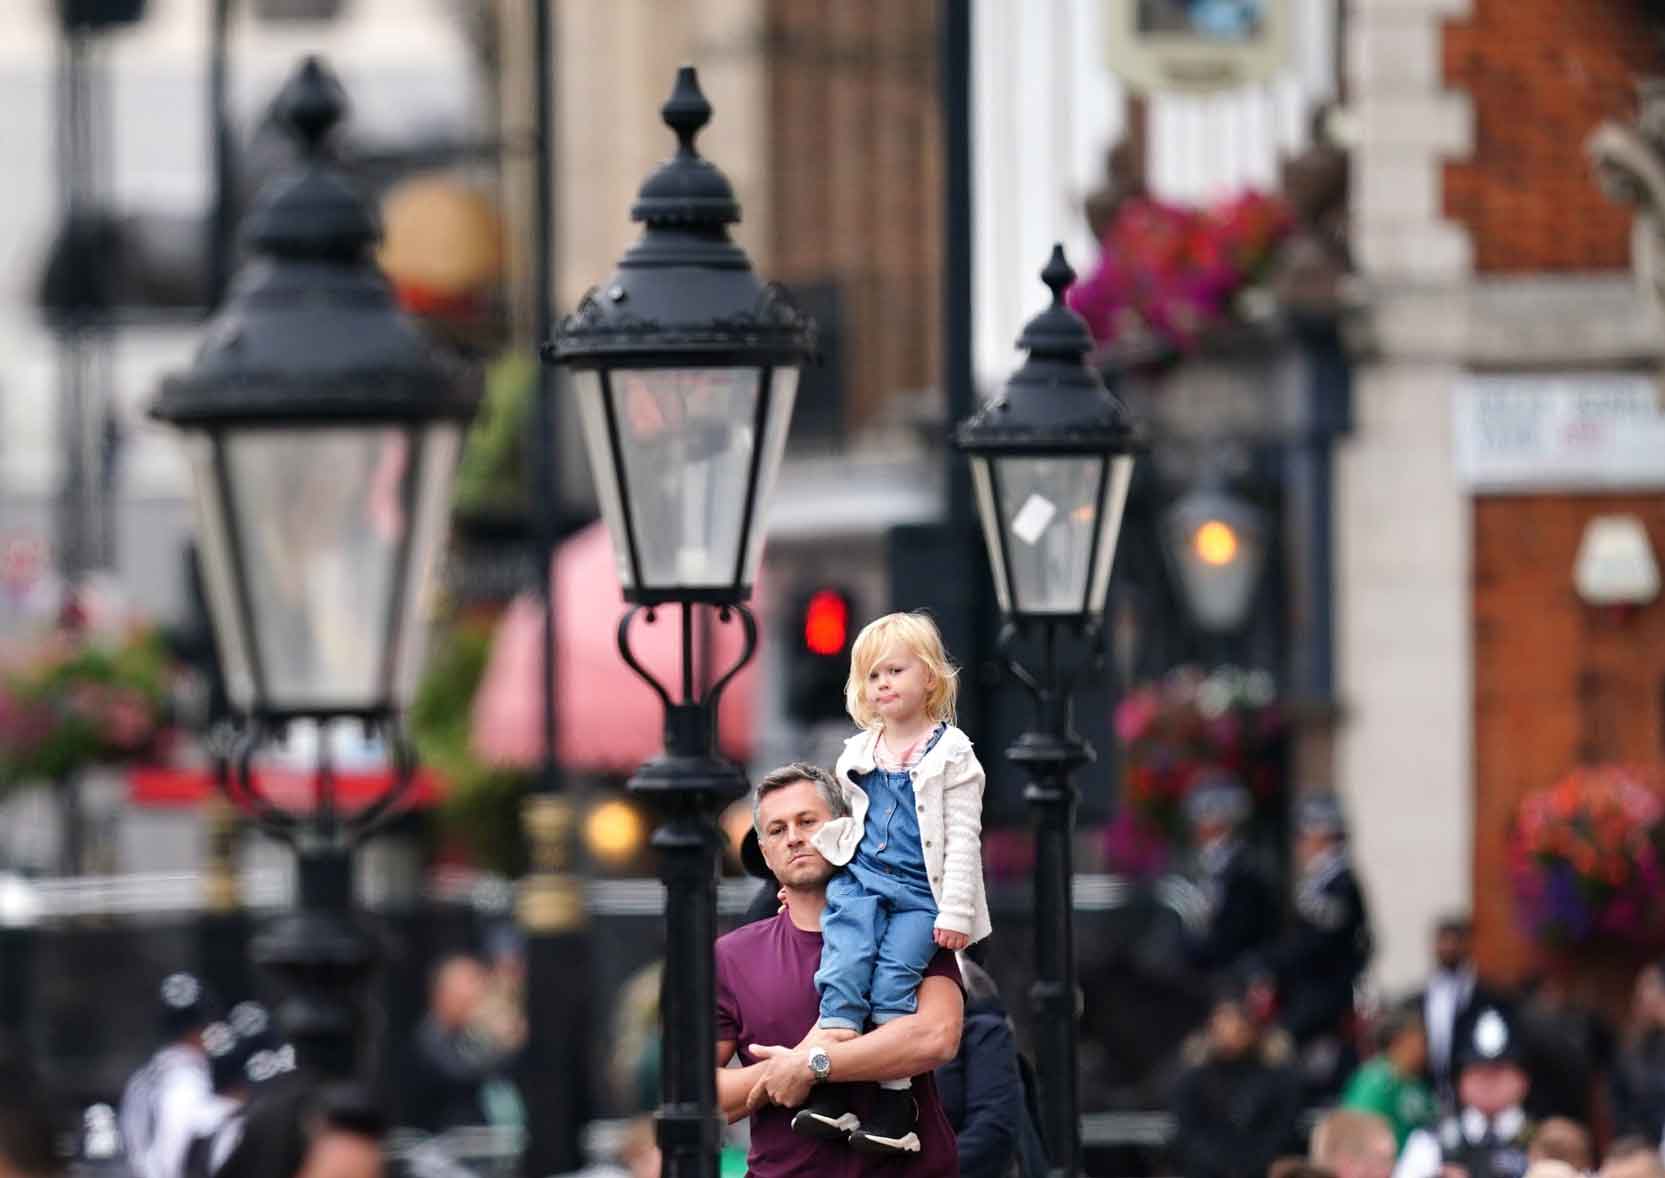 A young girl is held up by her father for a better view of the procession.